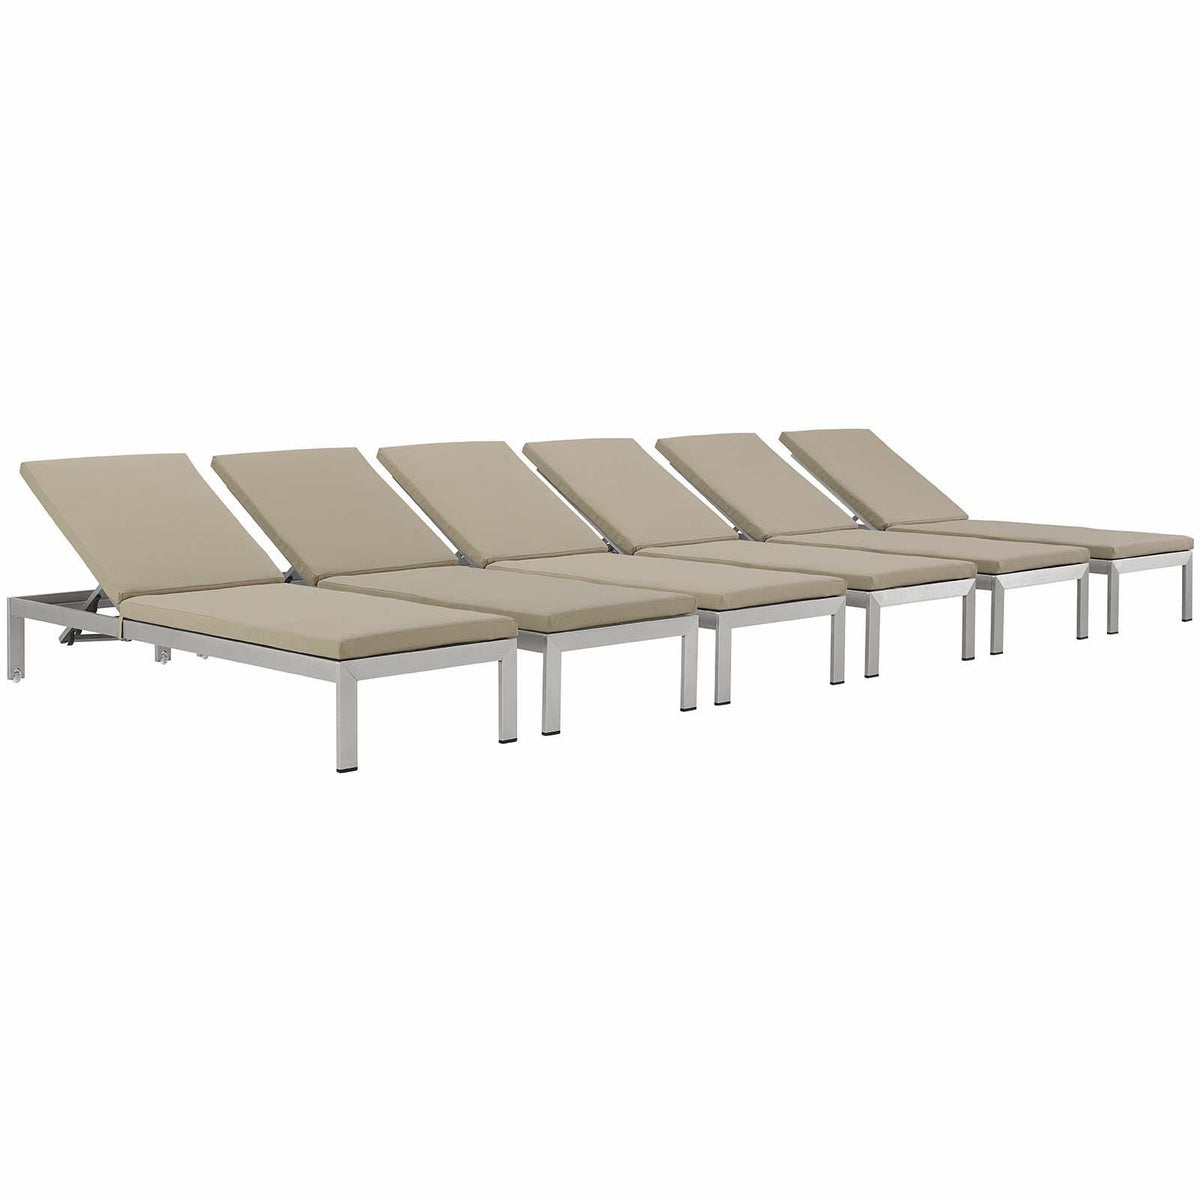 Modway Furniture Modern Shore Chaise with Cushions Outdoor Patio Aluminum Set of 6 - EEI-2739